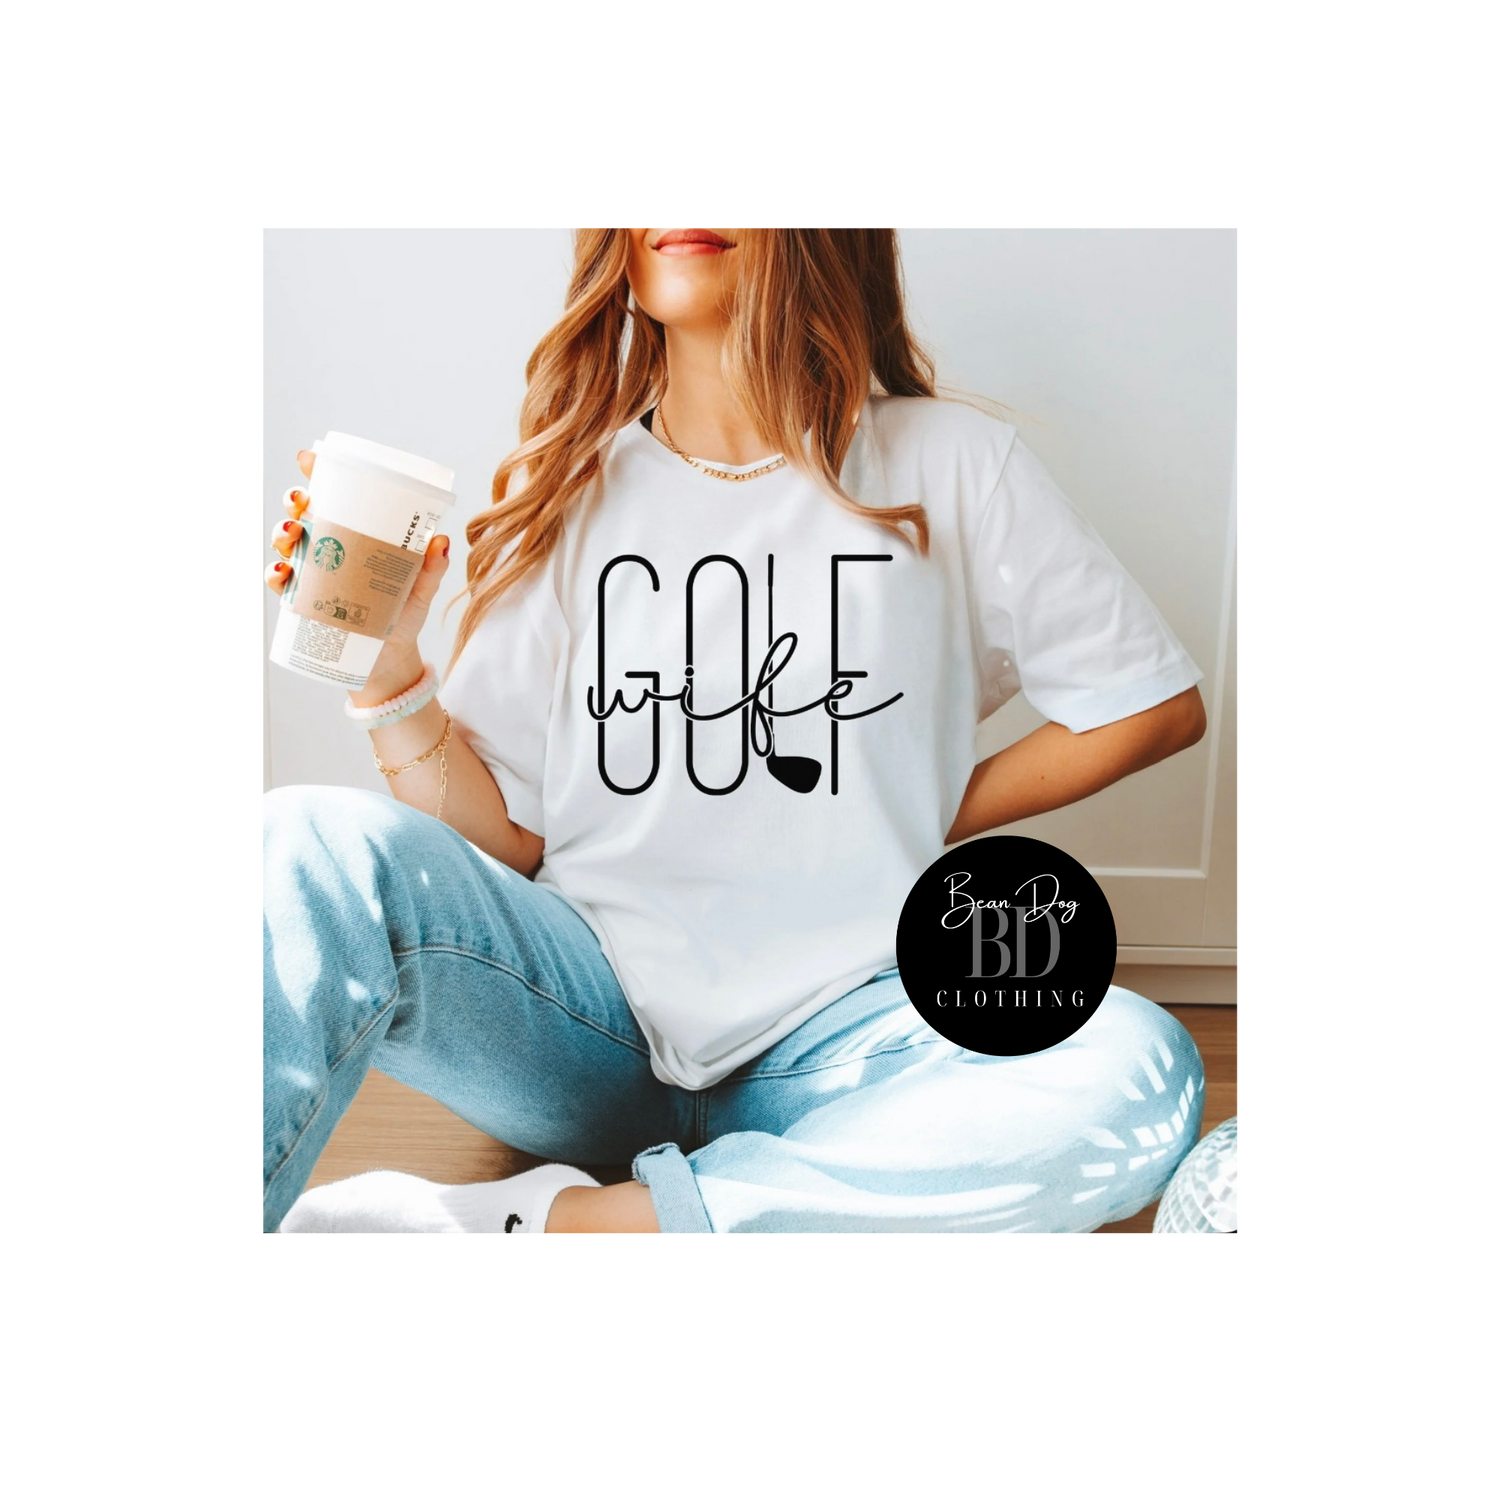 Chic Graphic Tees for the Golf Enthusiast